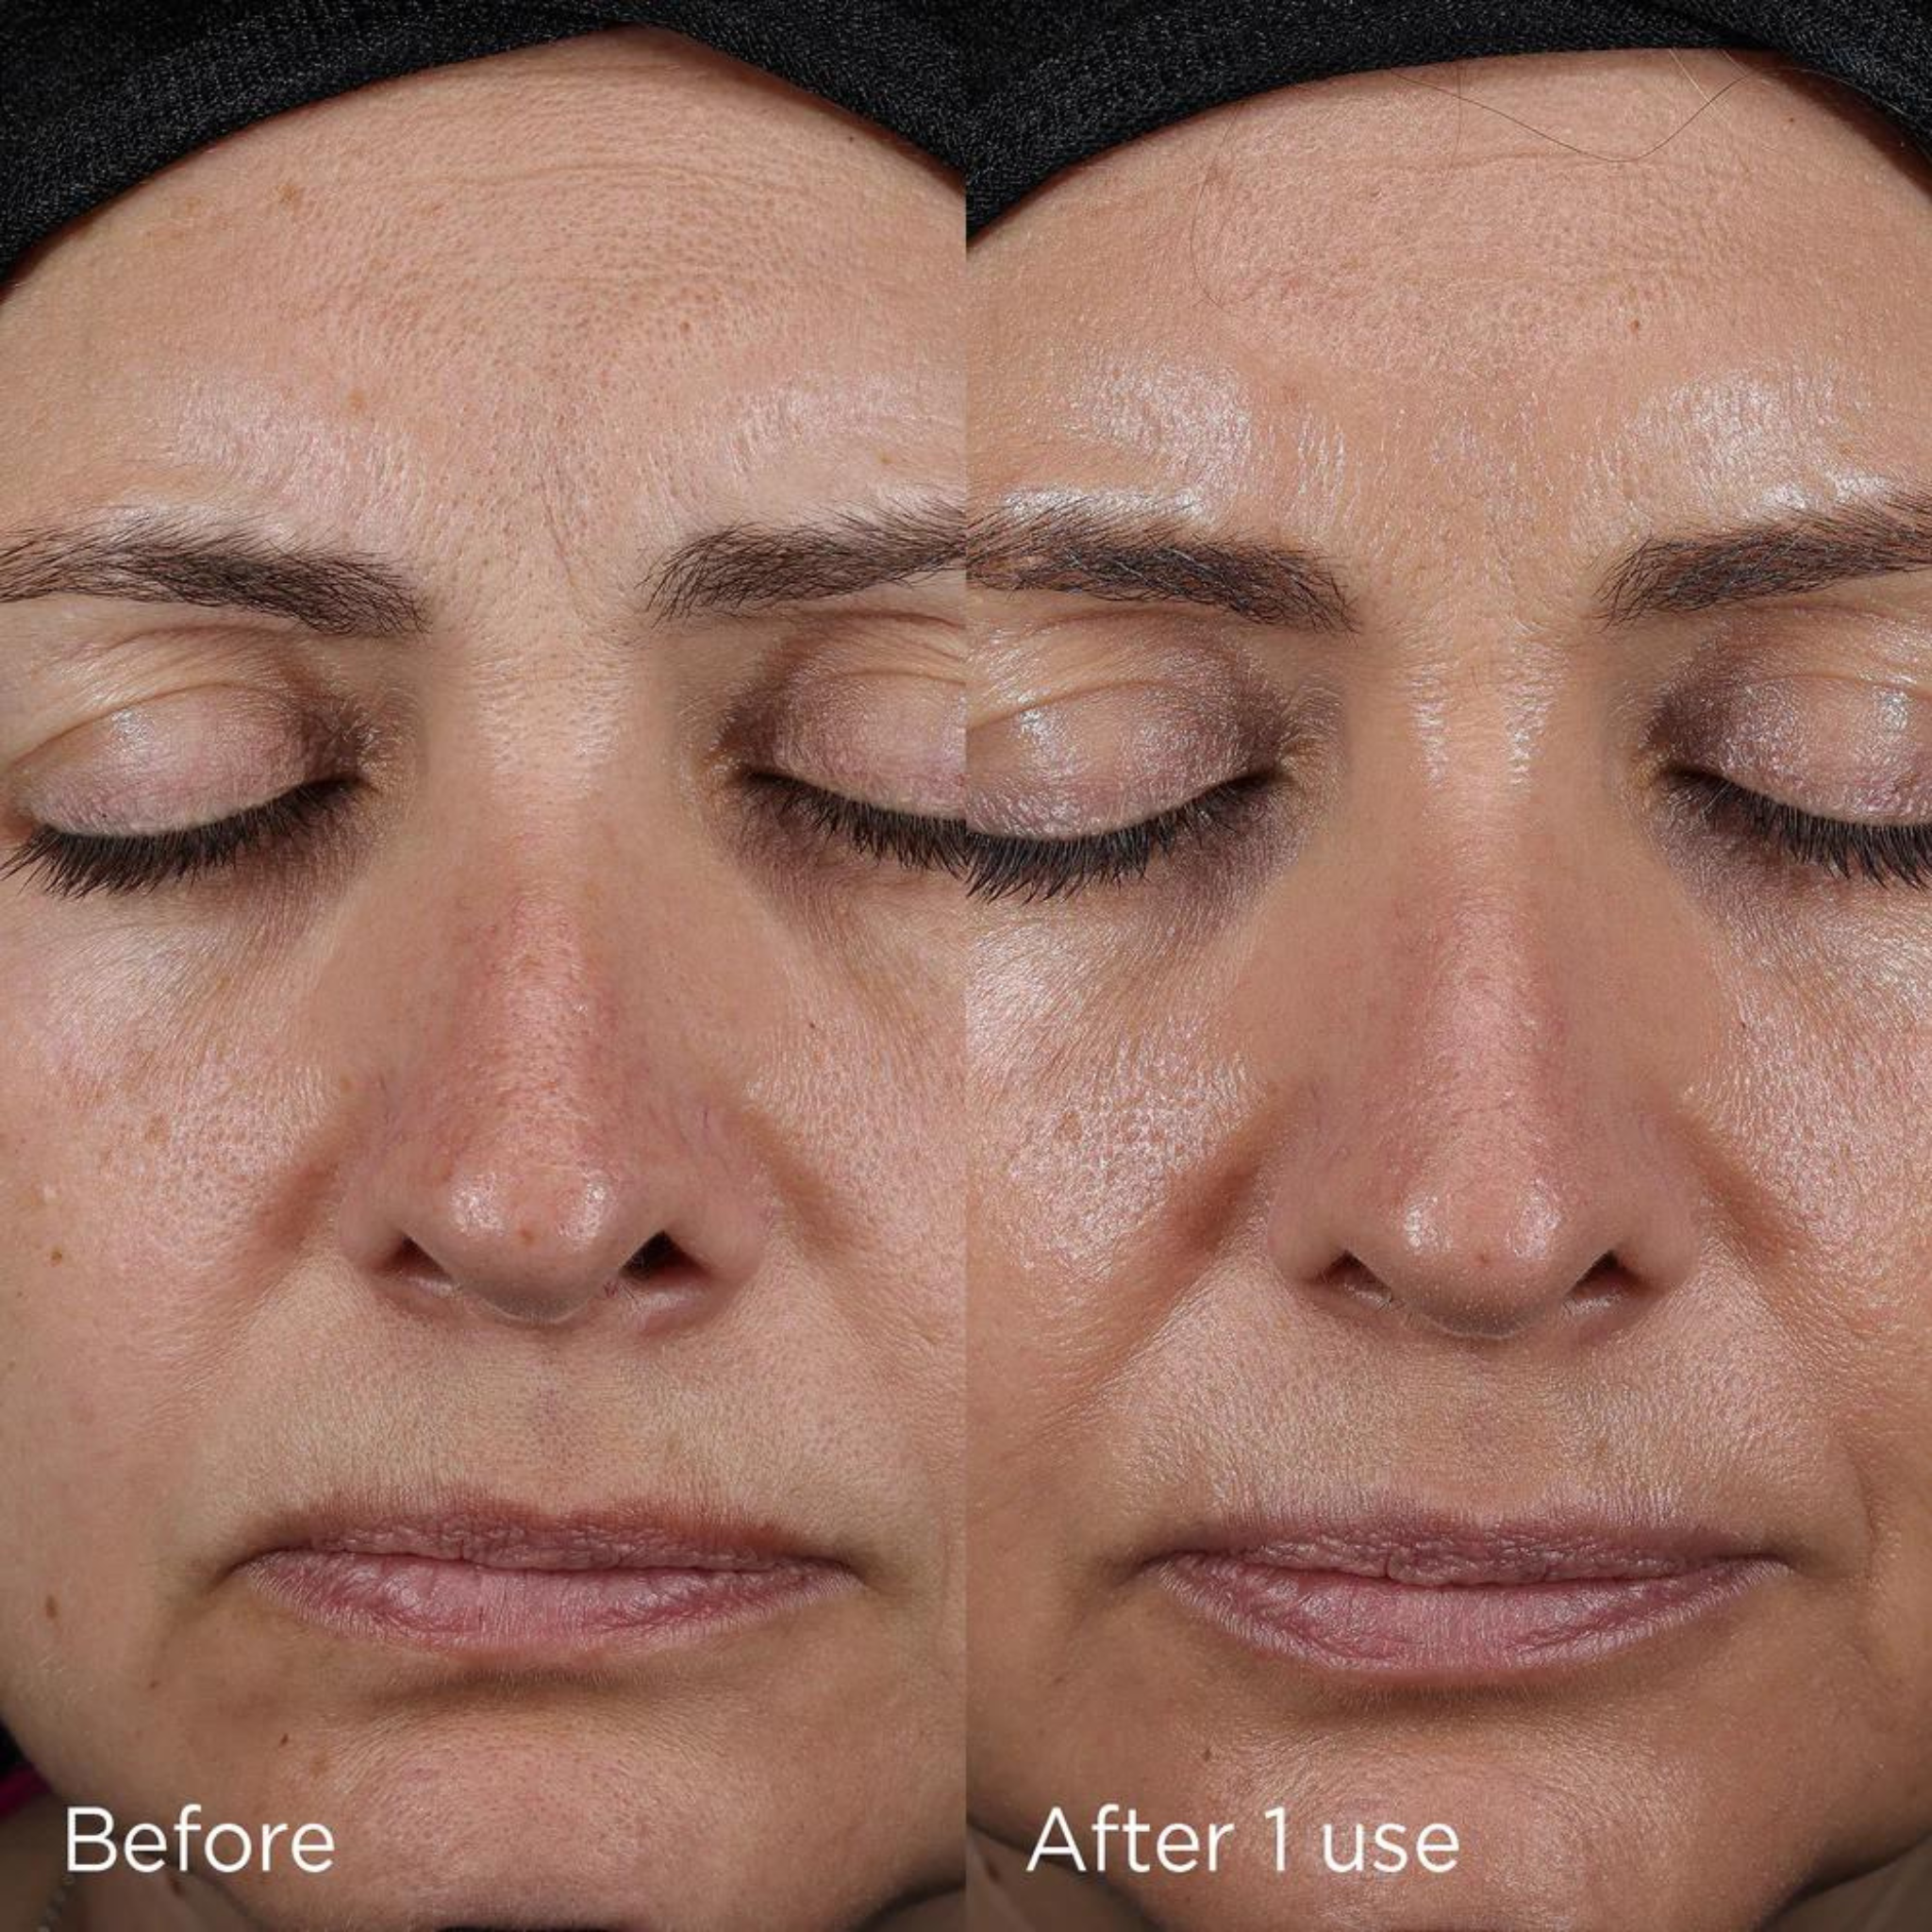 Before and after of 1 use of using the Advanced Smartblend SPF50+